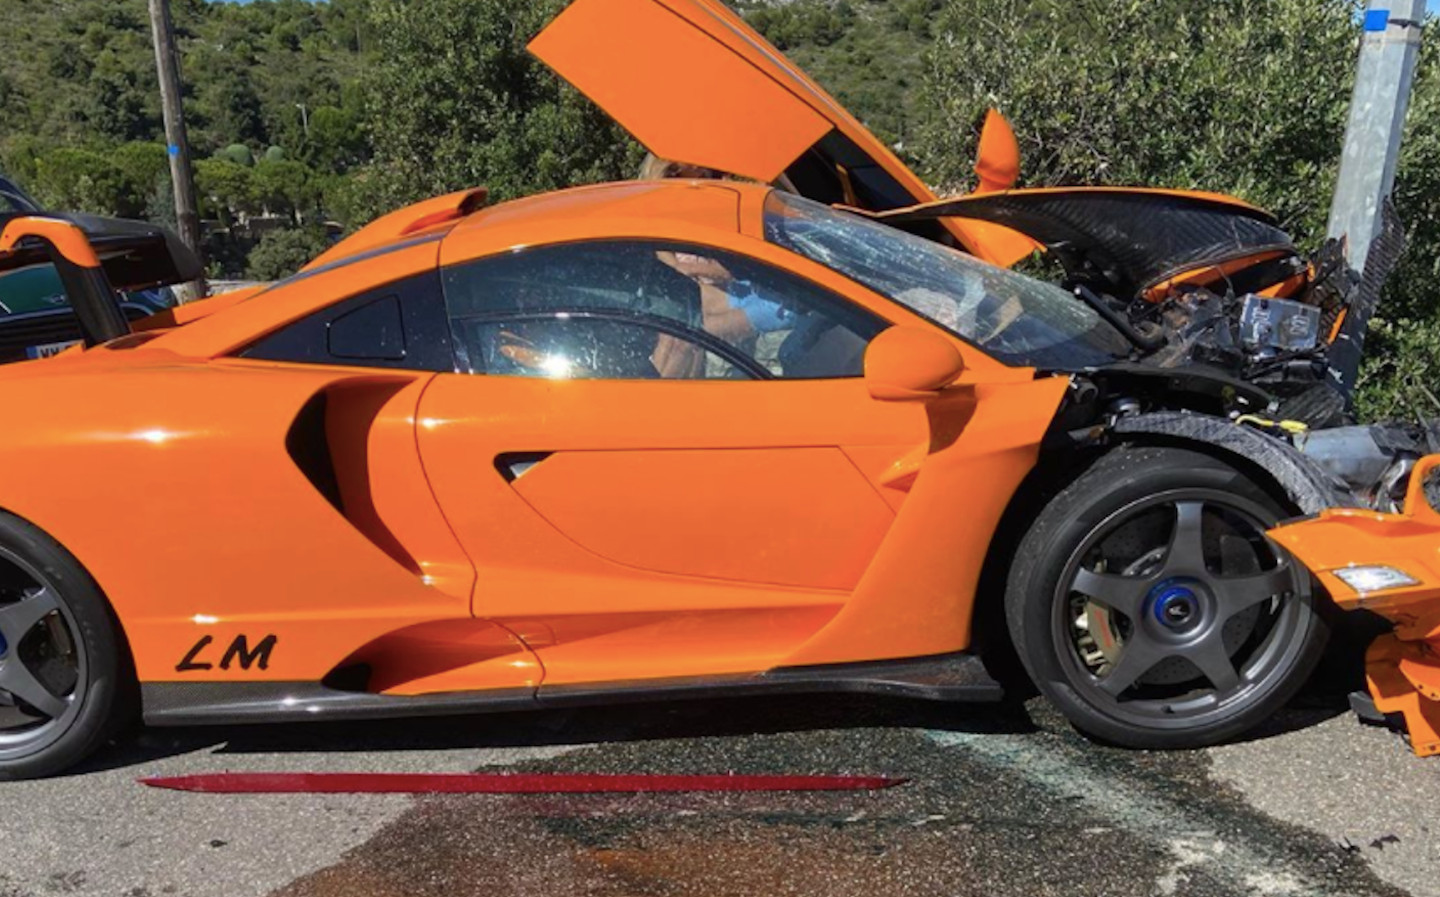 McLaren Senna LM owned by former F1 driver wrecked